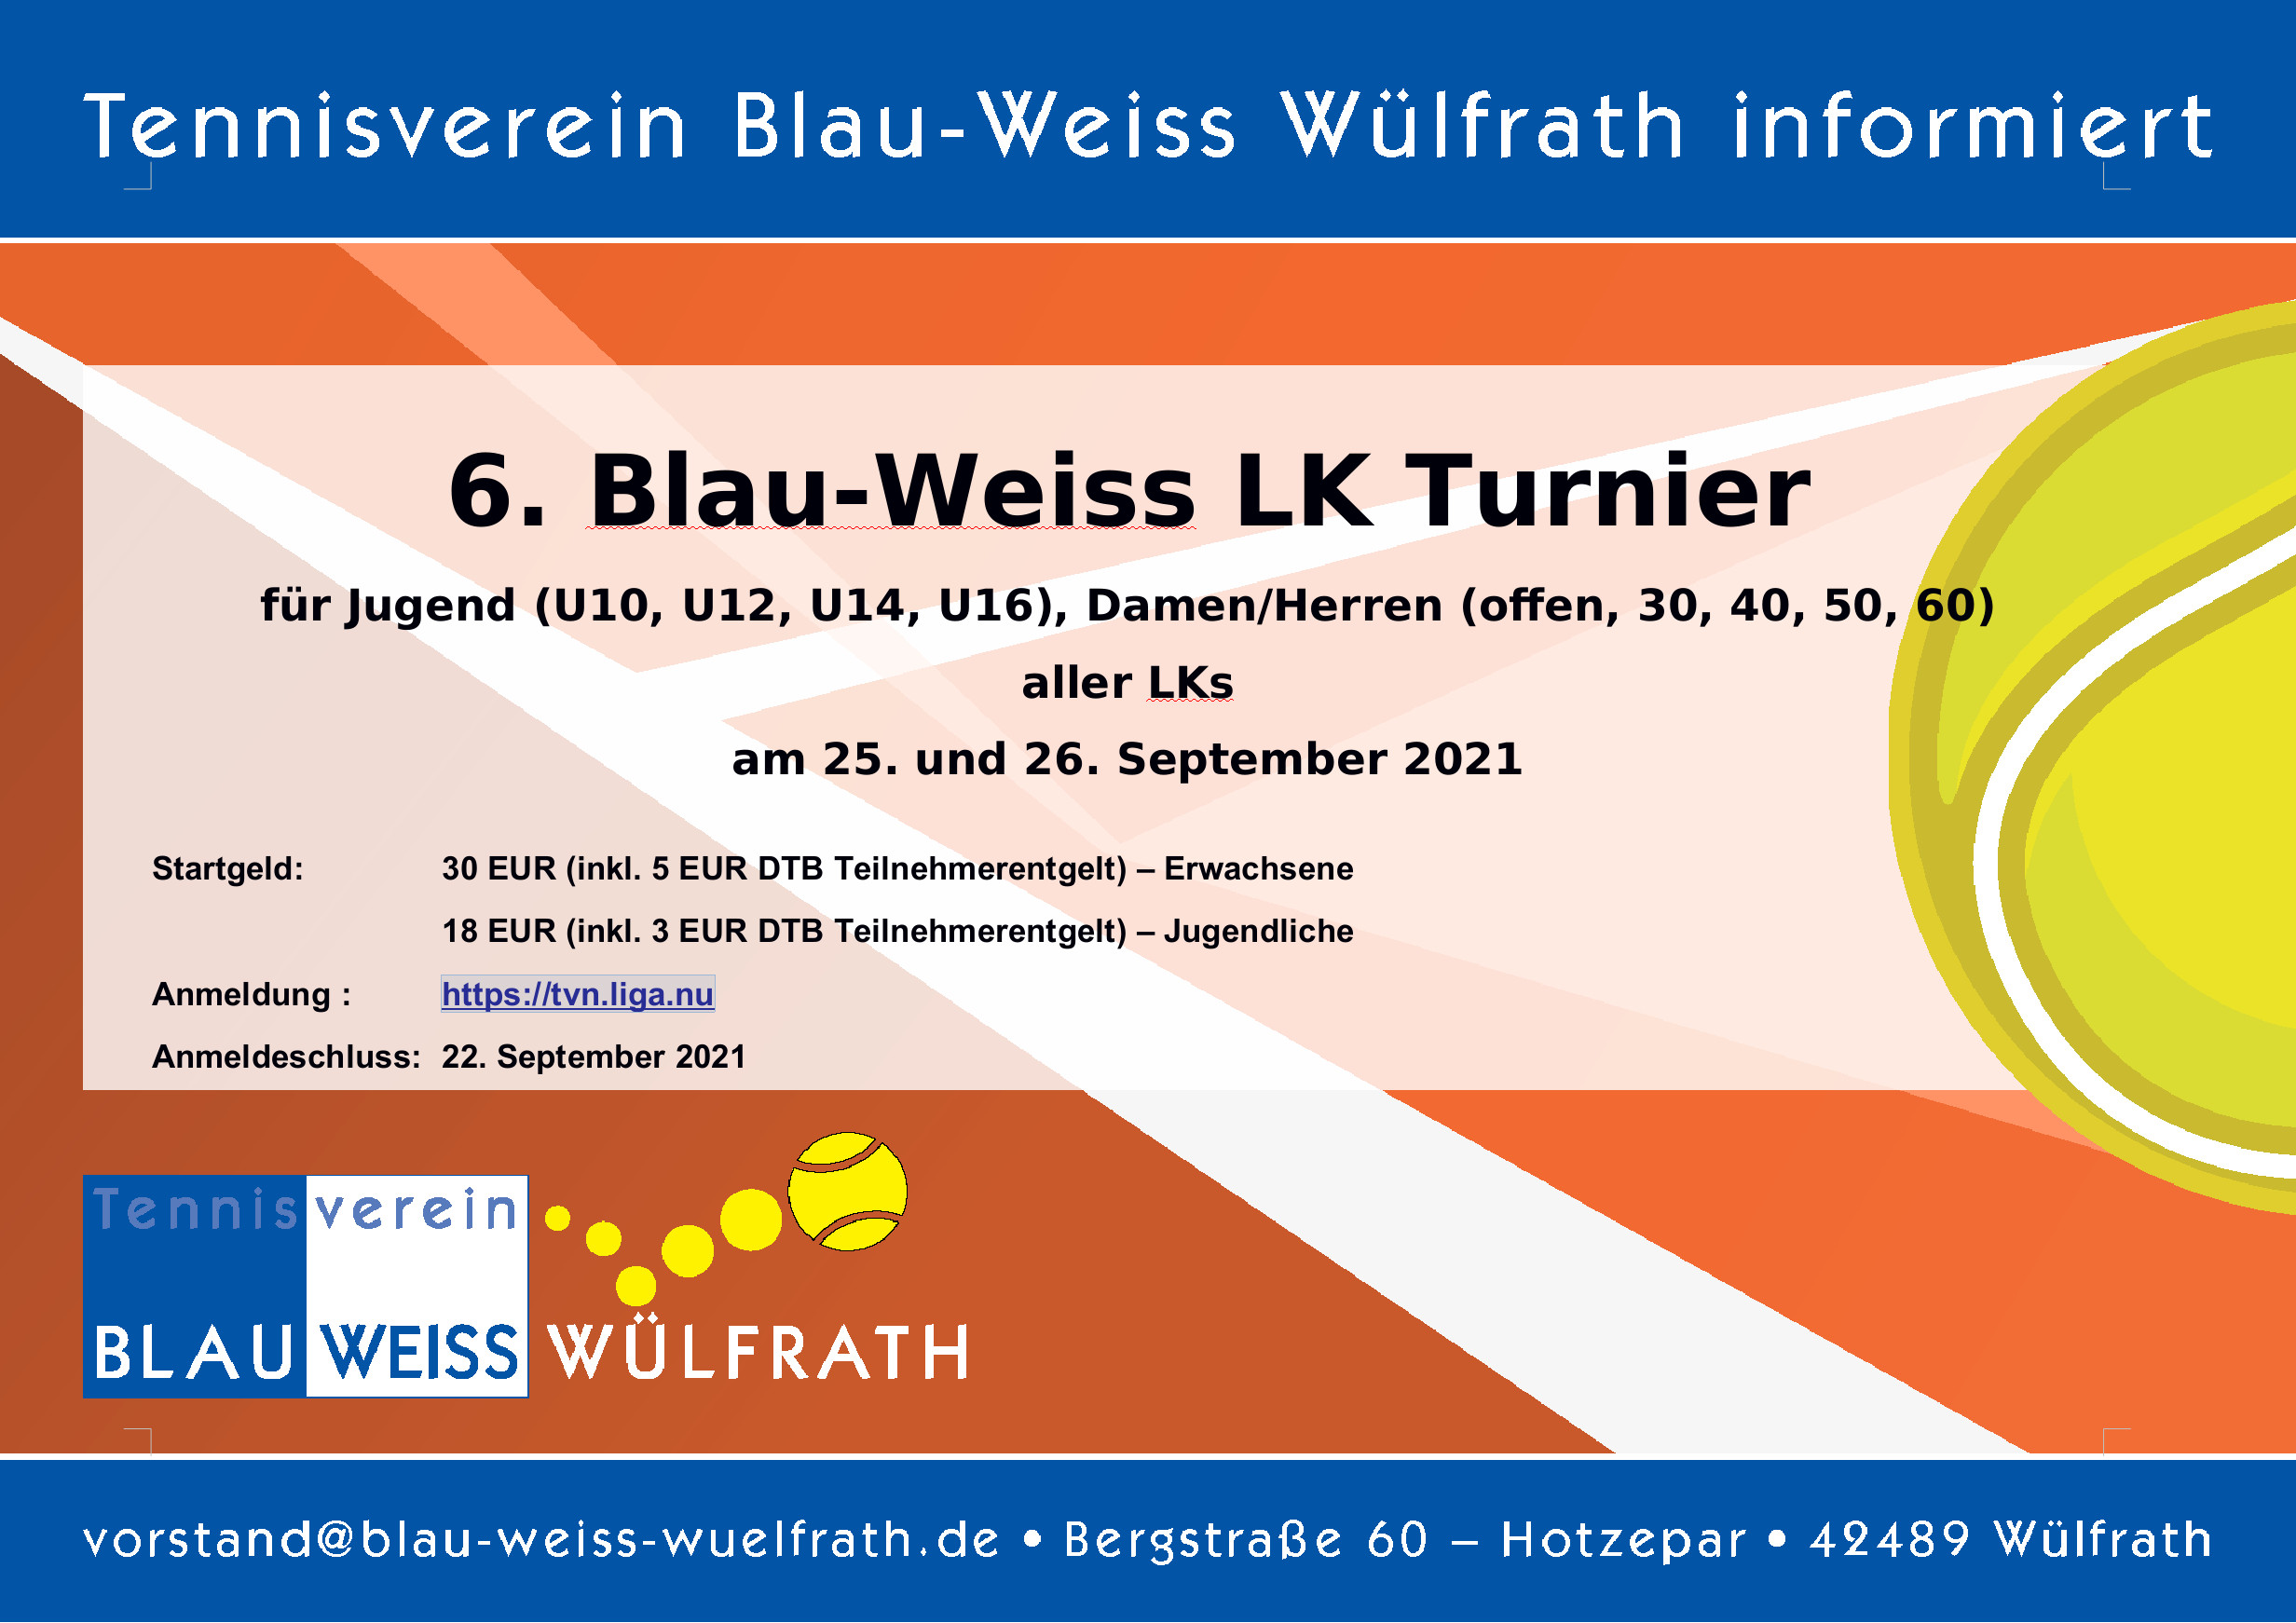 You are currently viewing 6. Blau-Weiss LK-Turnier